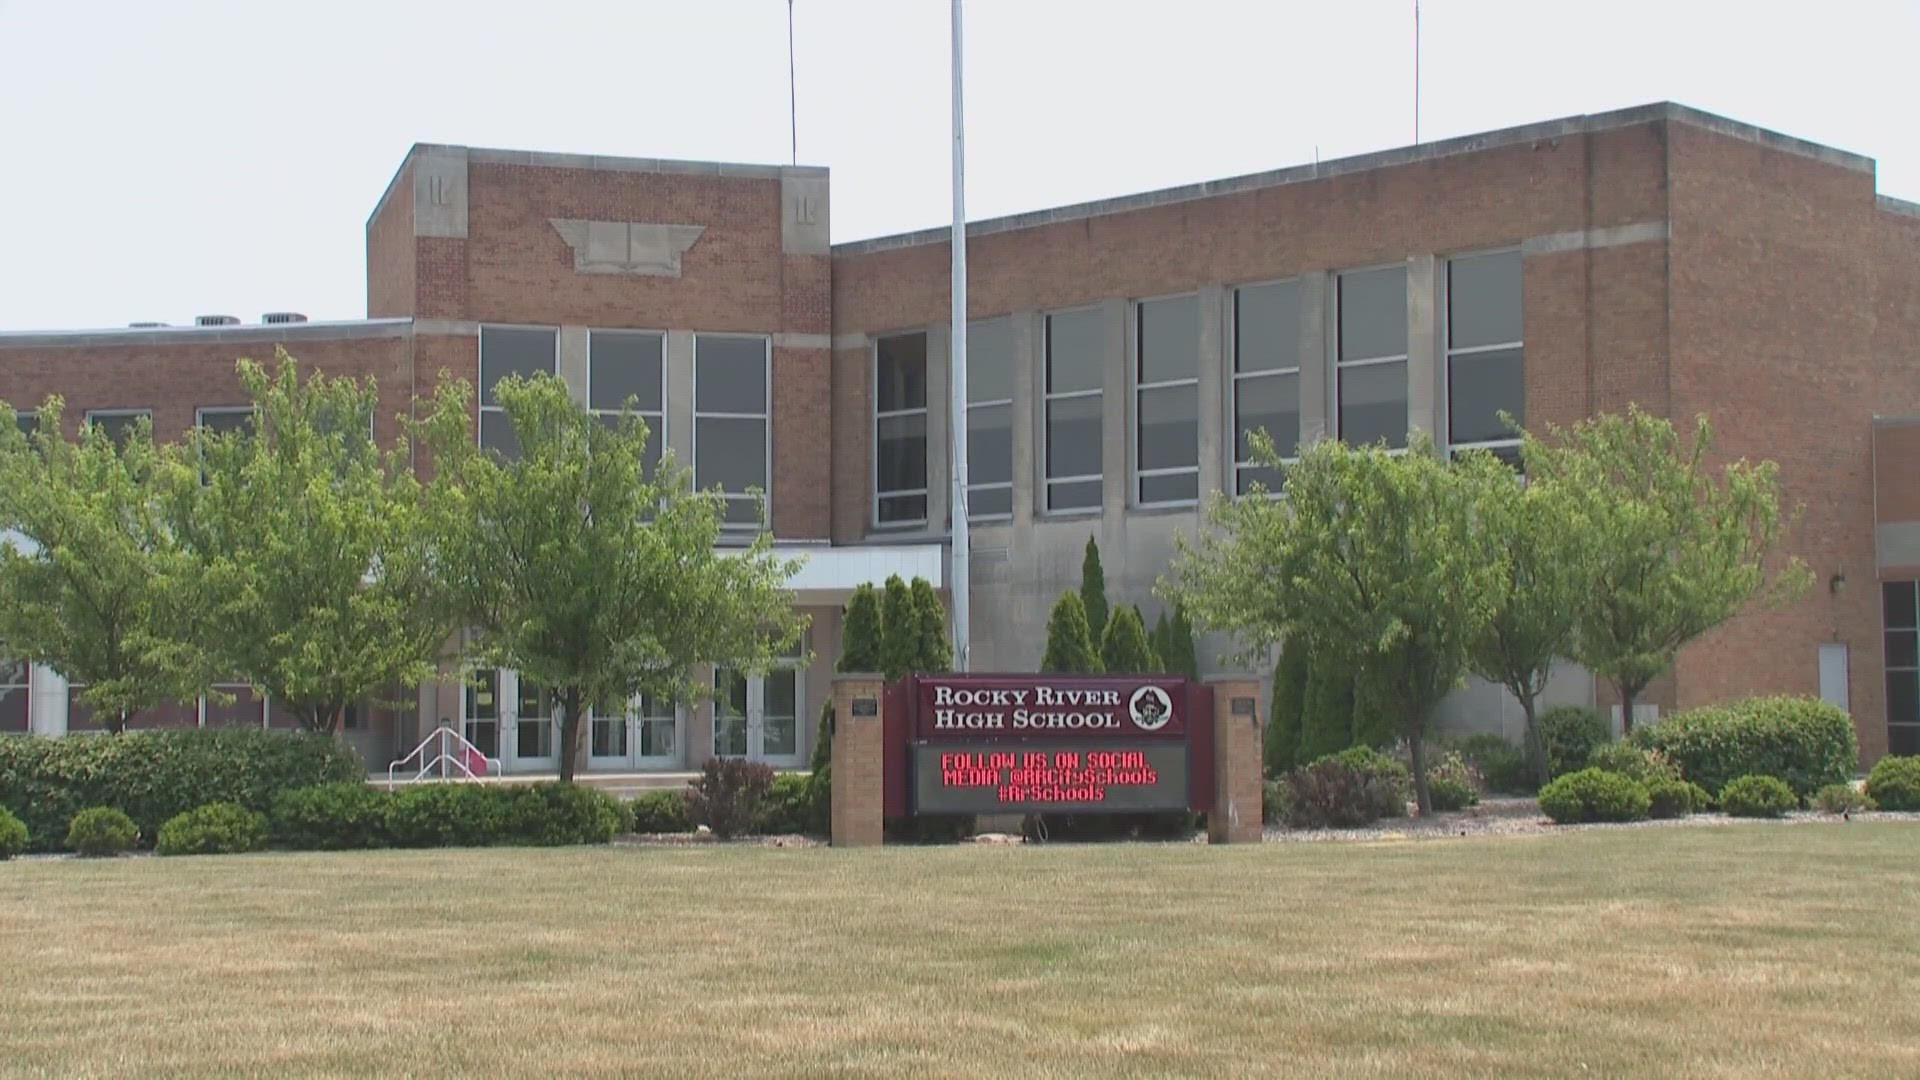 The investigation into Heath Horton started when a parent of a former Rocky River student accused him of drinking alcohol and smoking with her son.